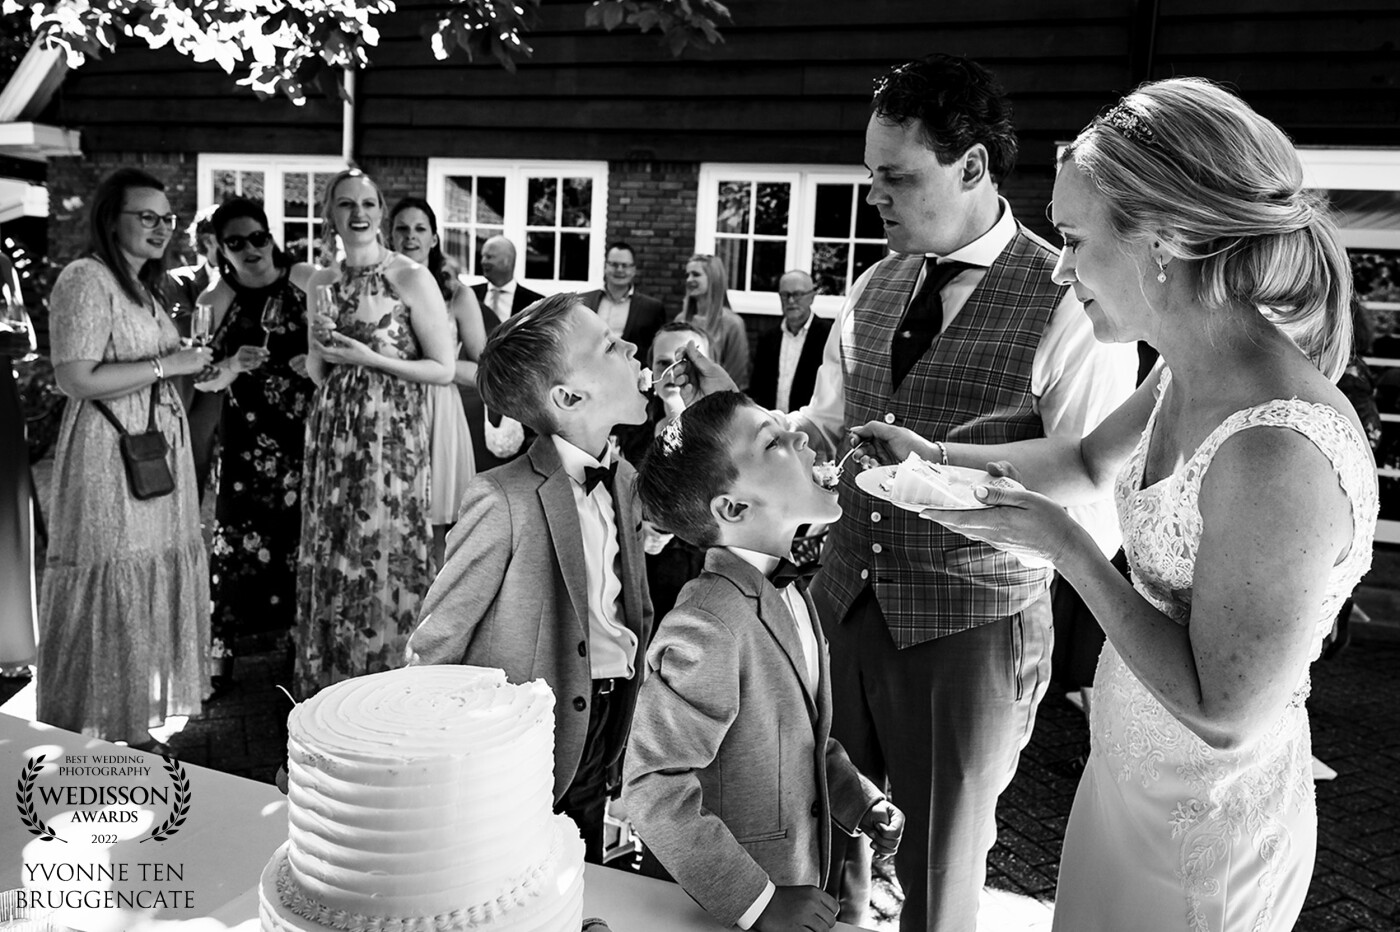 Wedding cake and children is always a perfect moment for great shots. You'll never know what's going to happen but something funny will always be there, so you just have to be ready for it. Look at this precious moment of the wedding couple with their sons, like little birds being seeded by their parents. The guests watching this moment, wat just waiting for them to open their mouth too, haha!